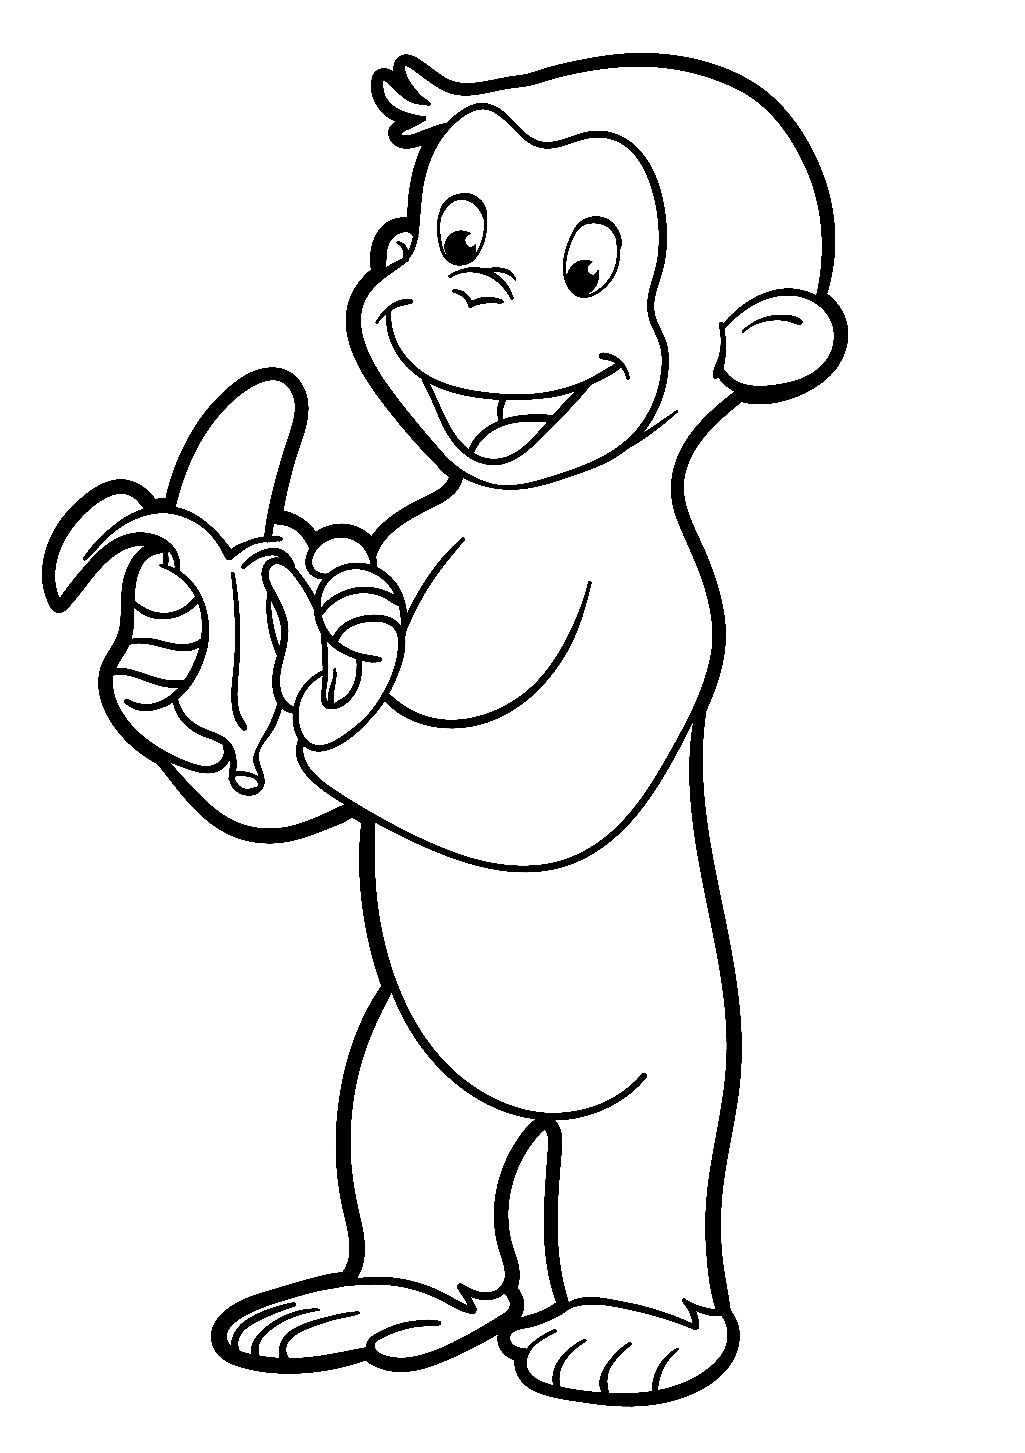 George Eating a Banana Coloring Pages